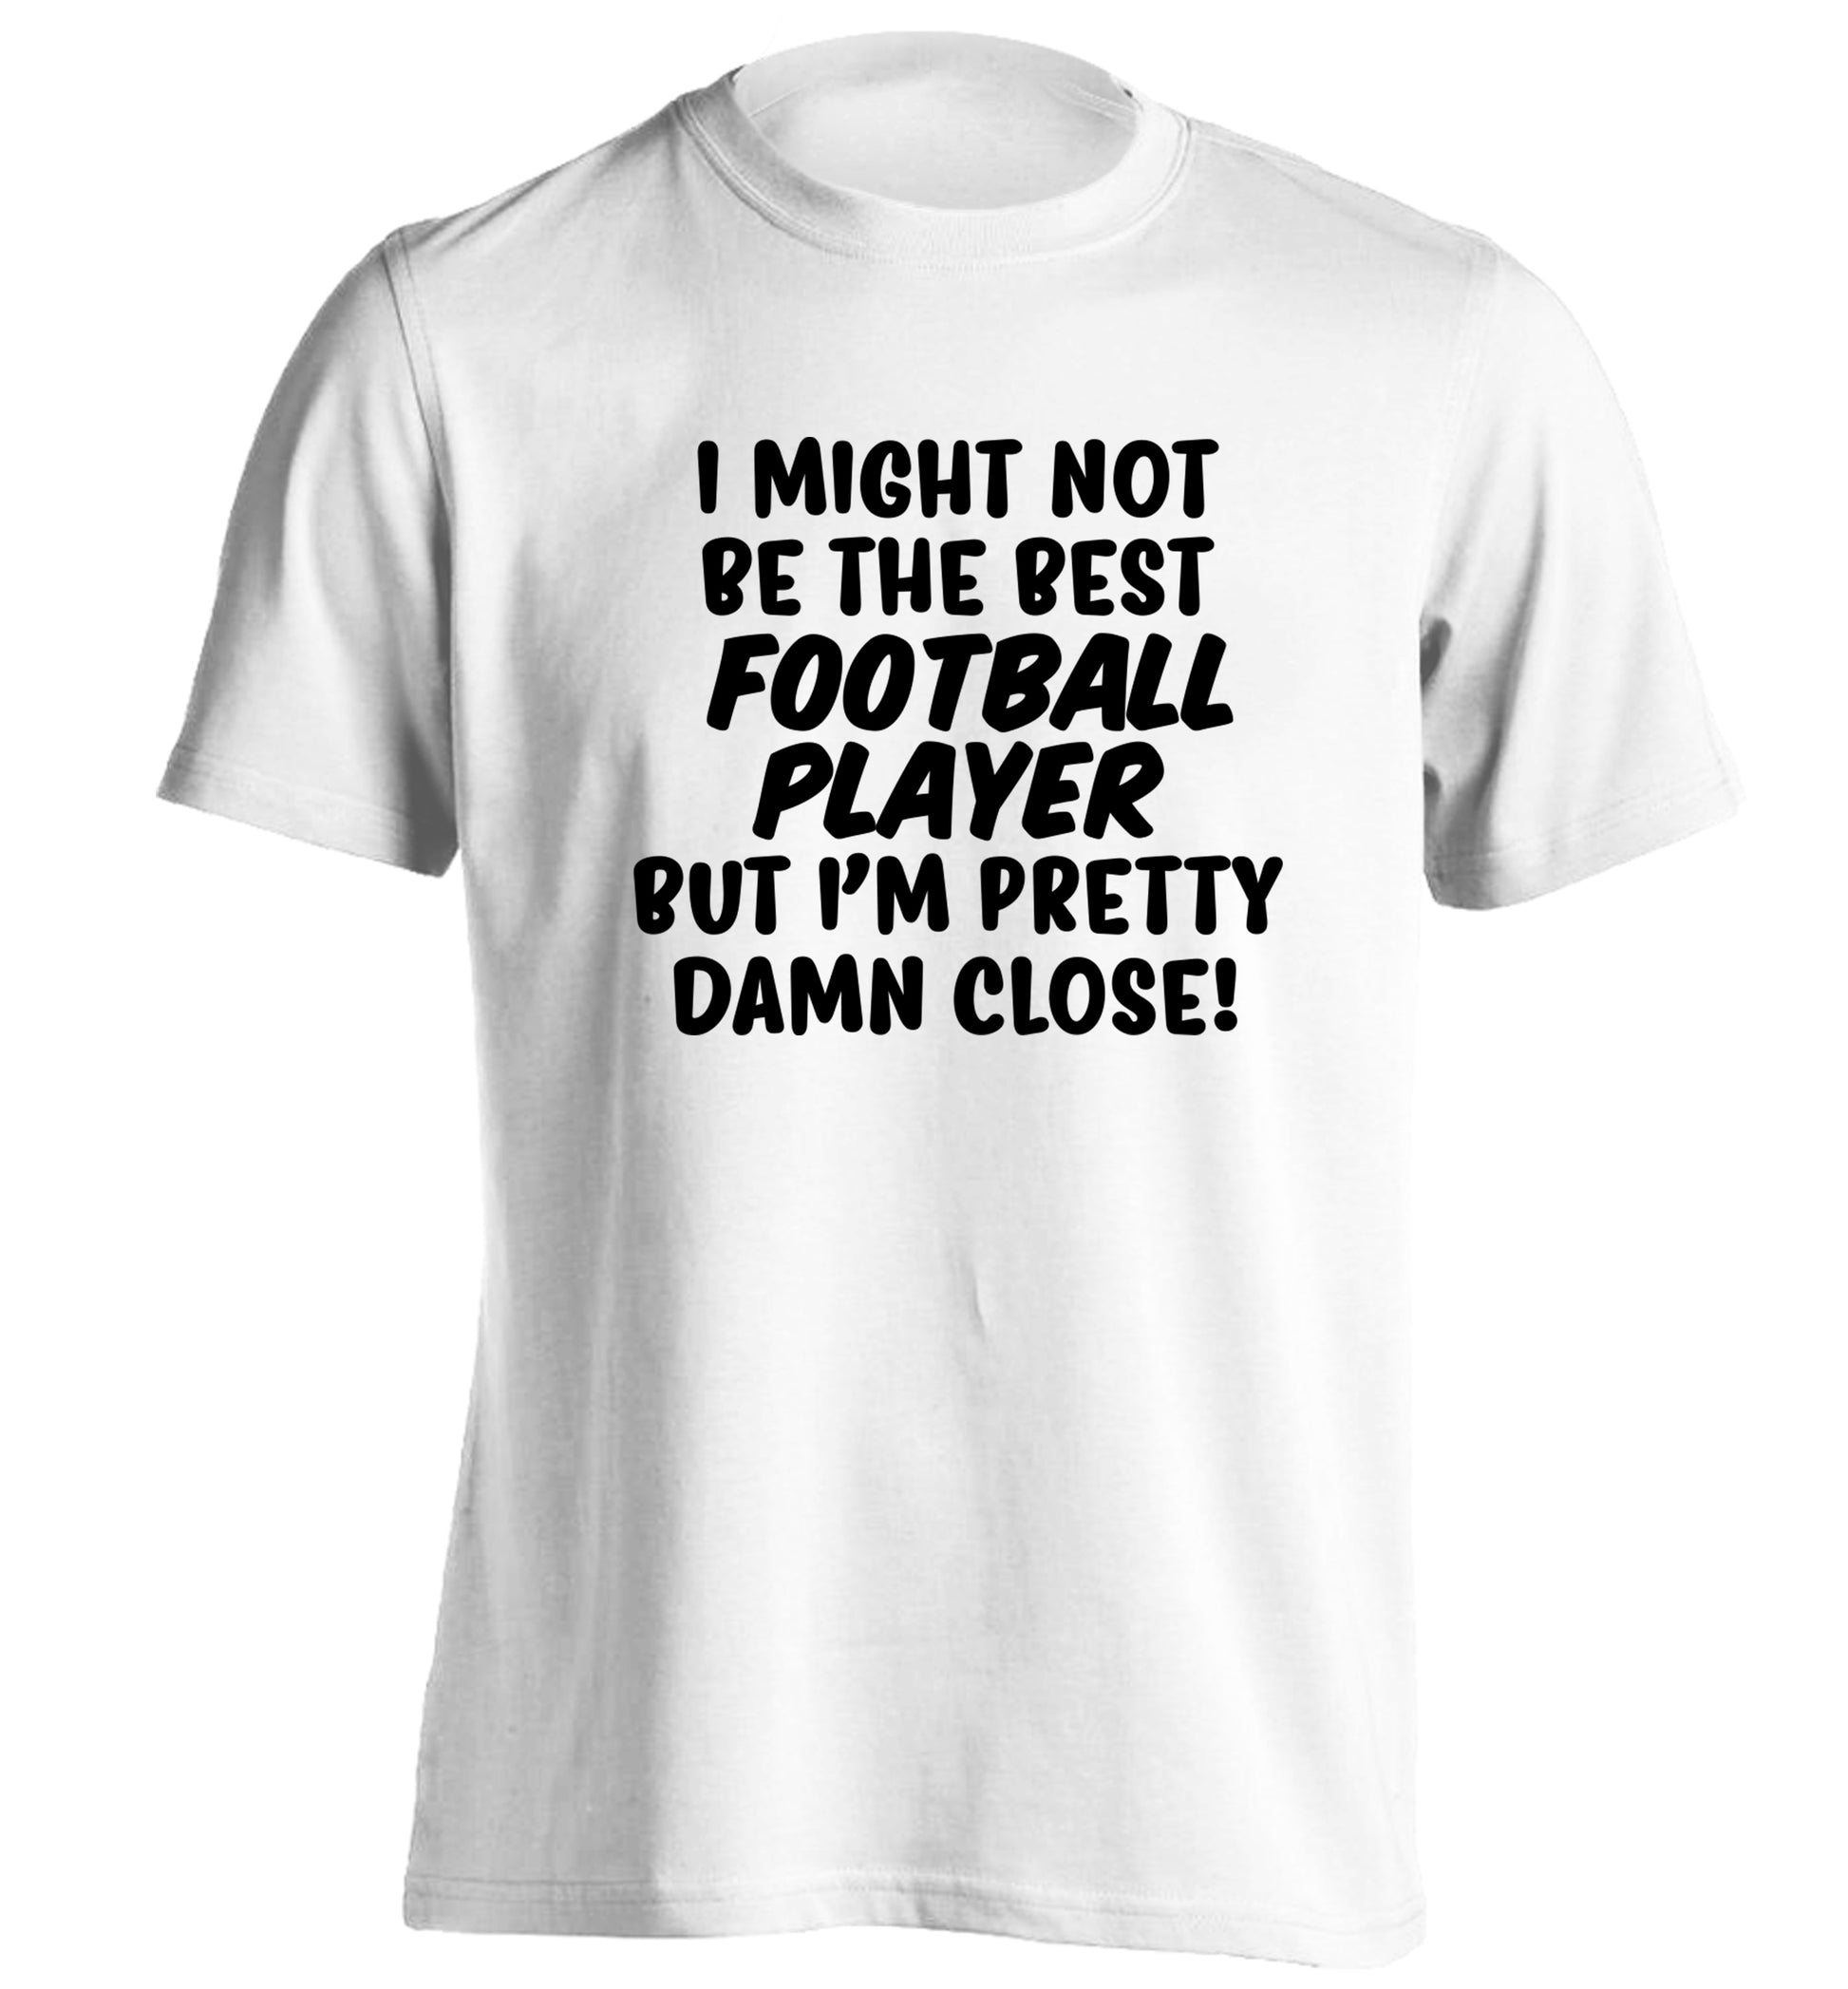 I might not be the best football player but I'm pretty close! adults unisexwhite Tshirt 2XL